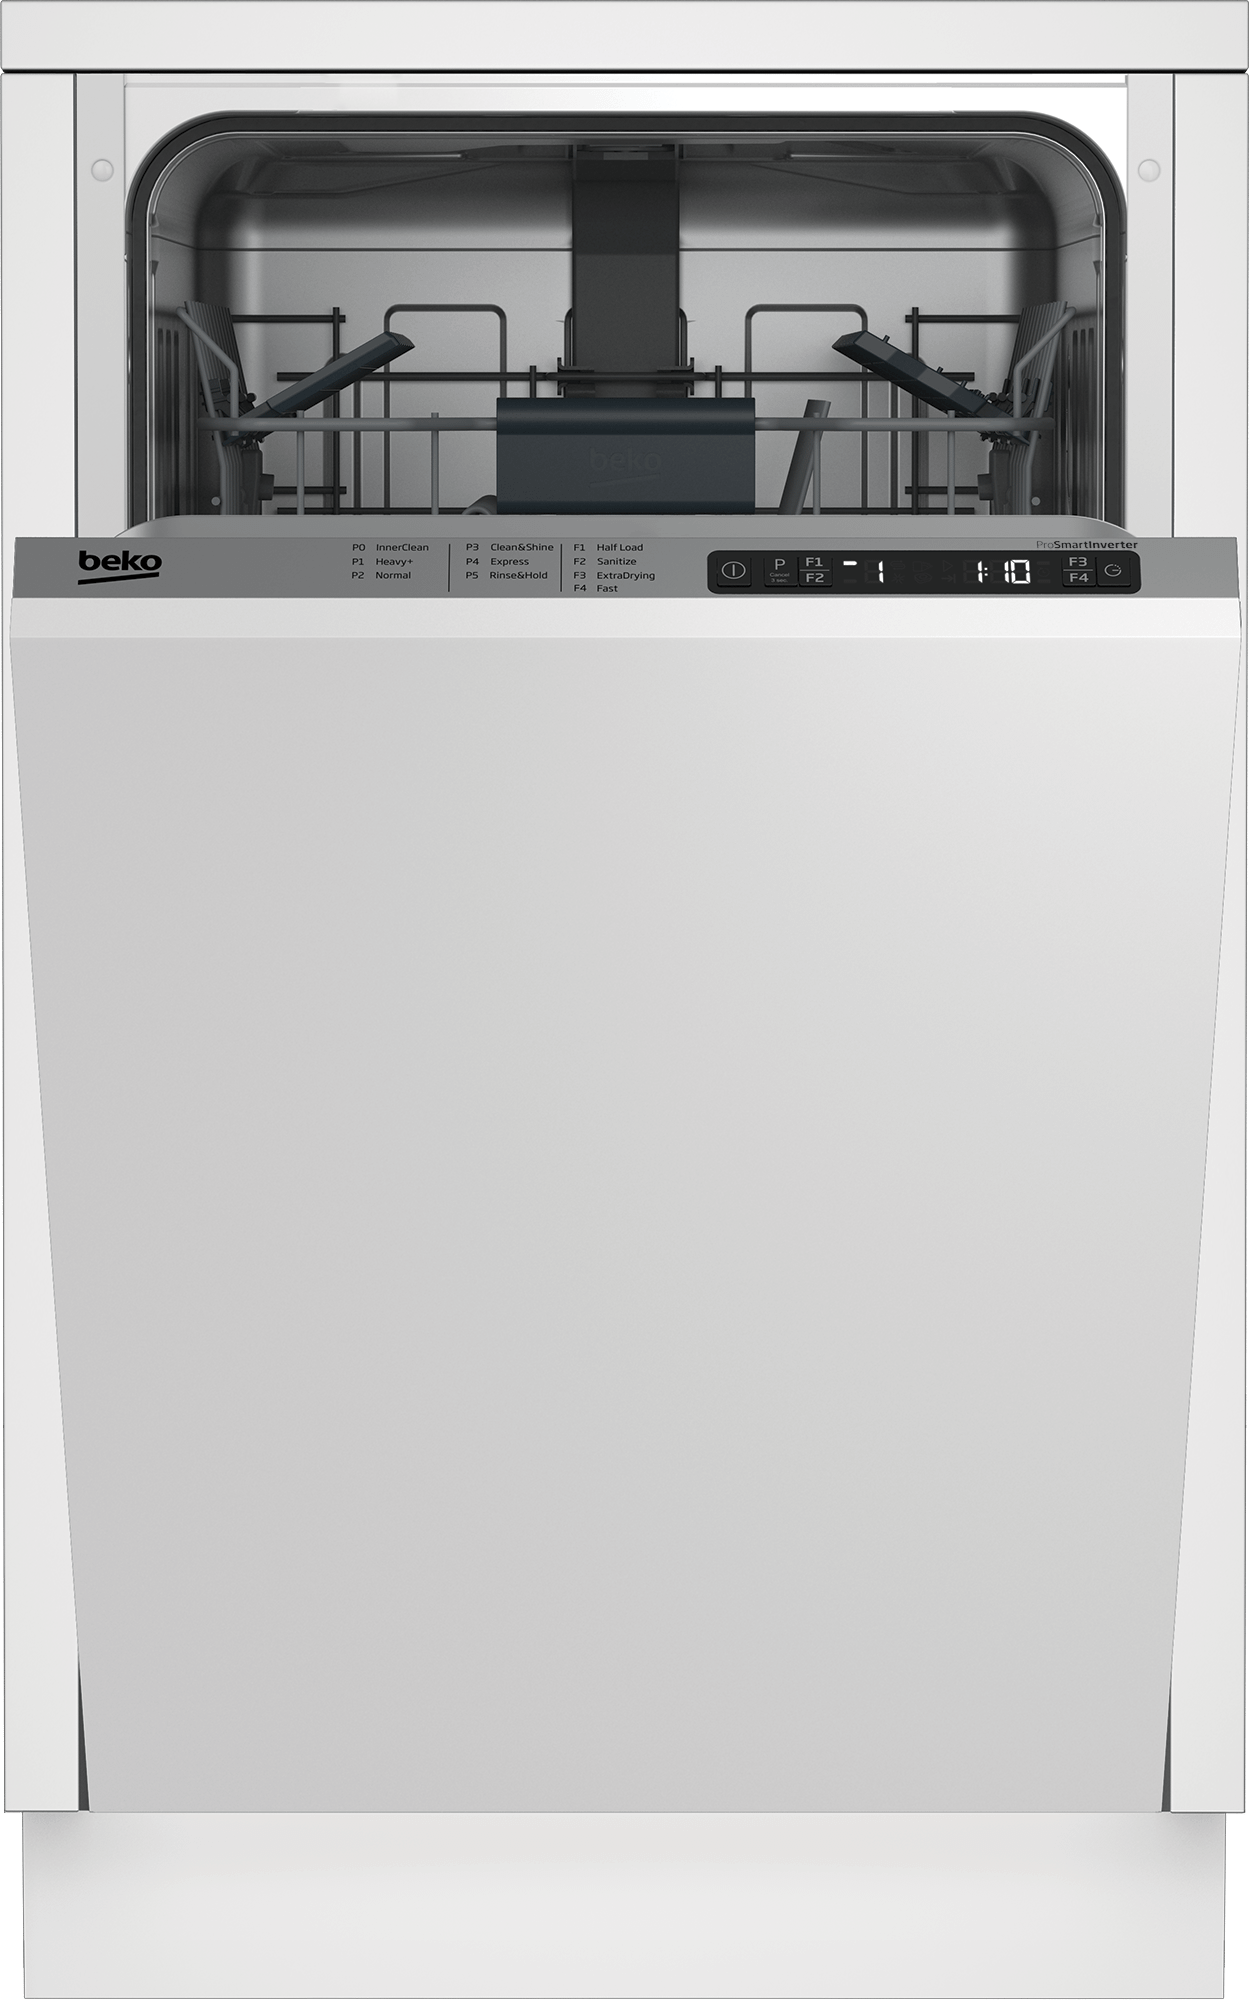 Slim Size Dishwasher, 8 place settings, 48 dBa, Fully Integrated Panel Ready